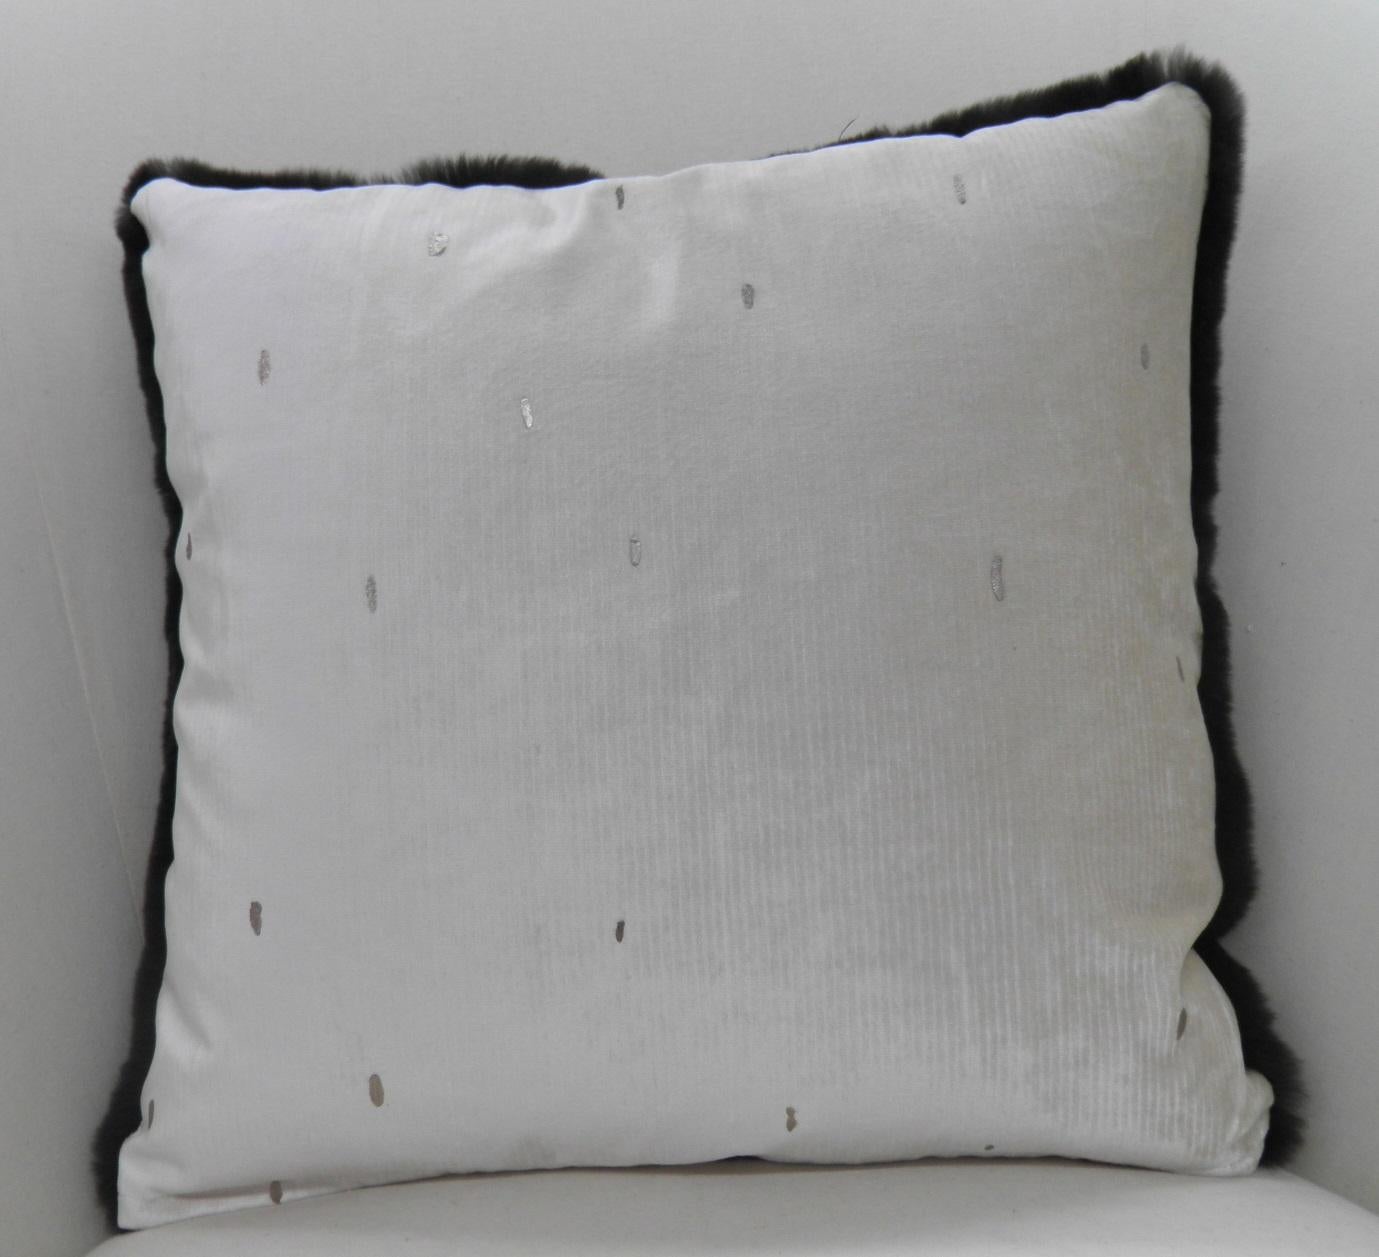 Luxurious Sheared Nutria Throw Pillows In Excellent Condition For Sale In Bronx, NY